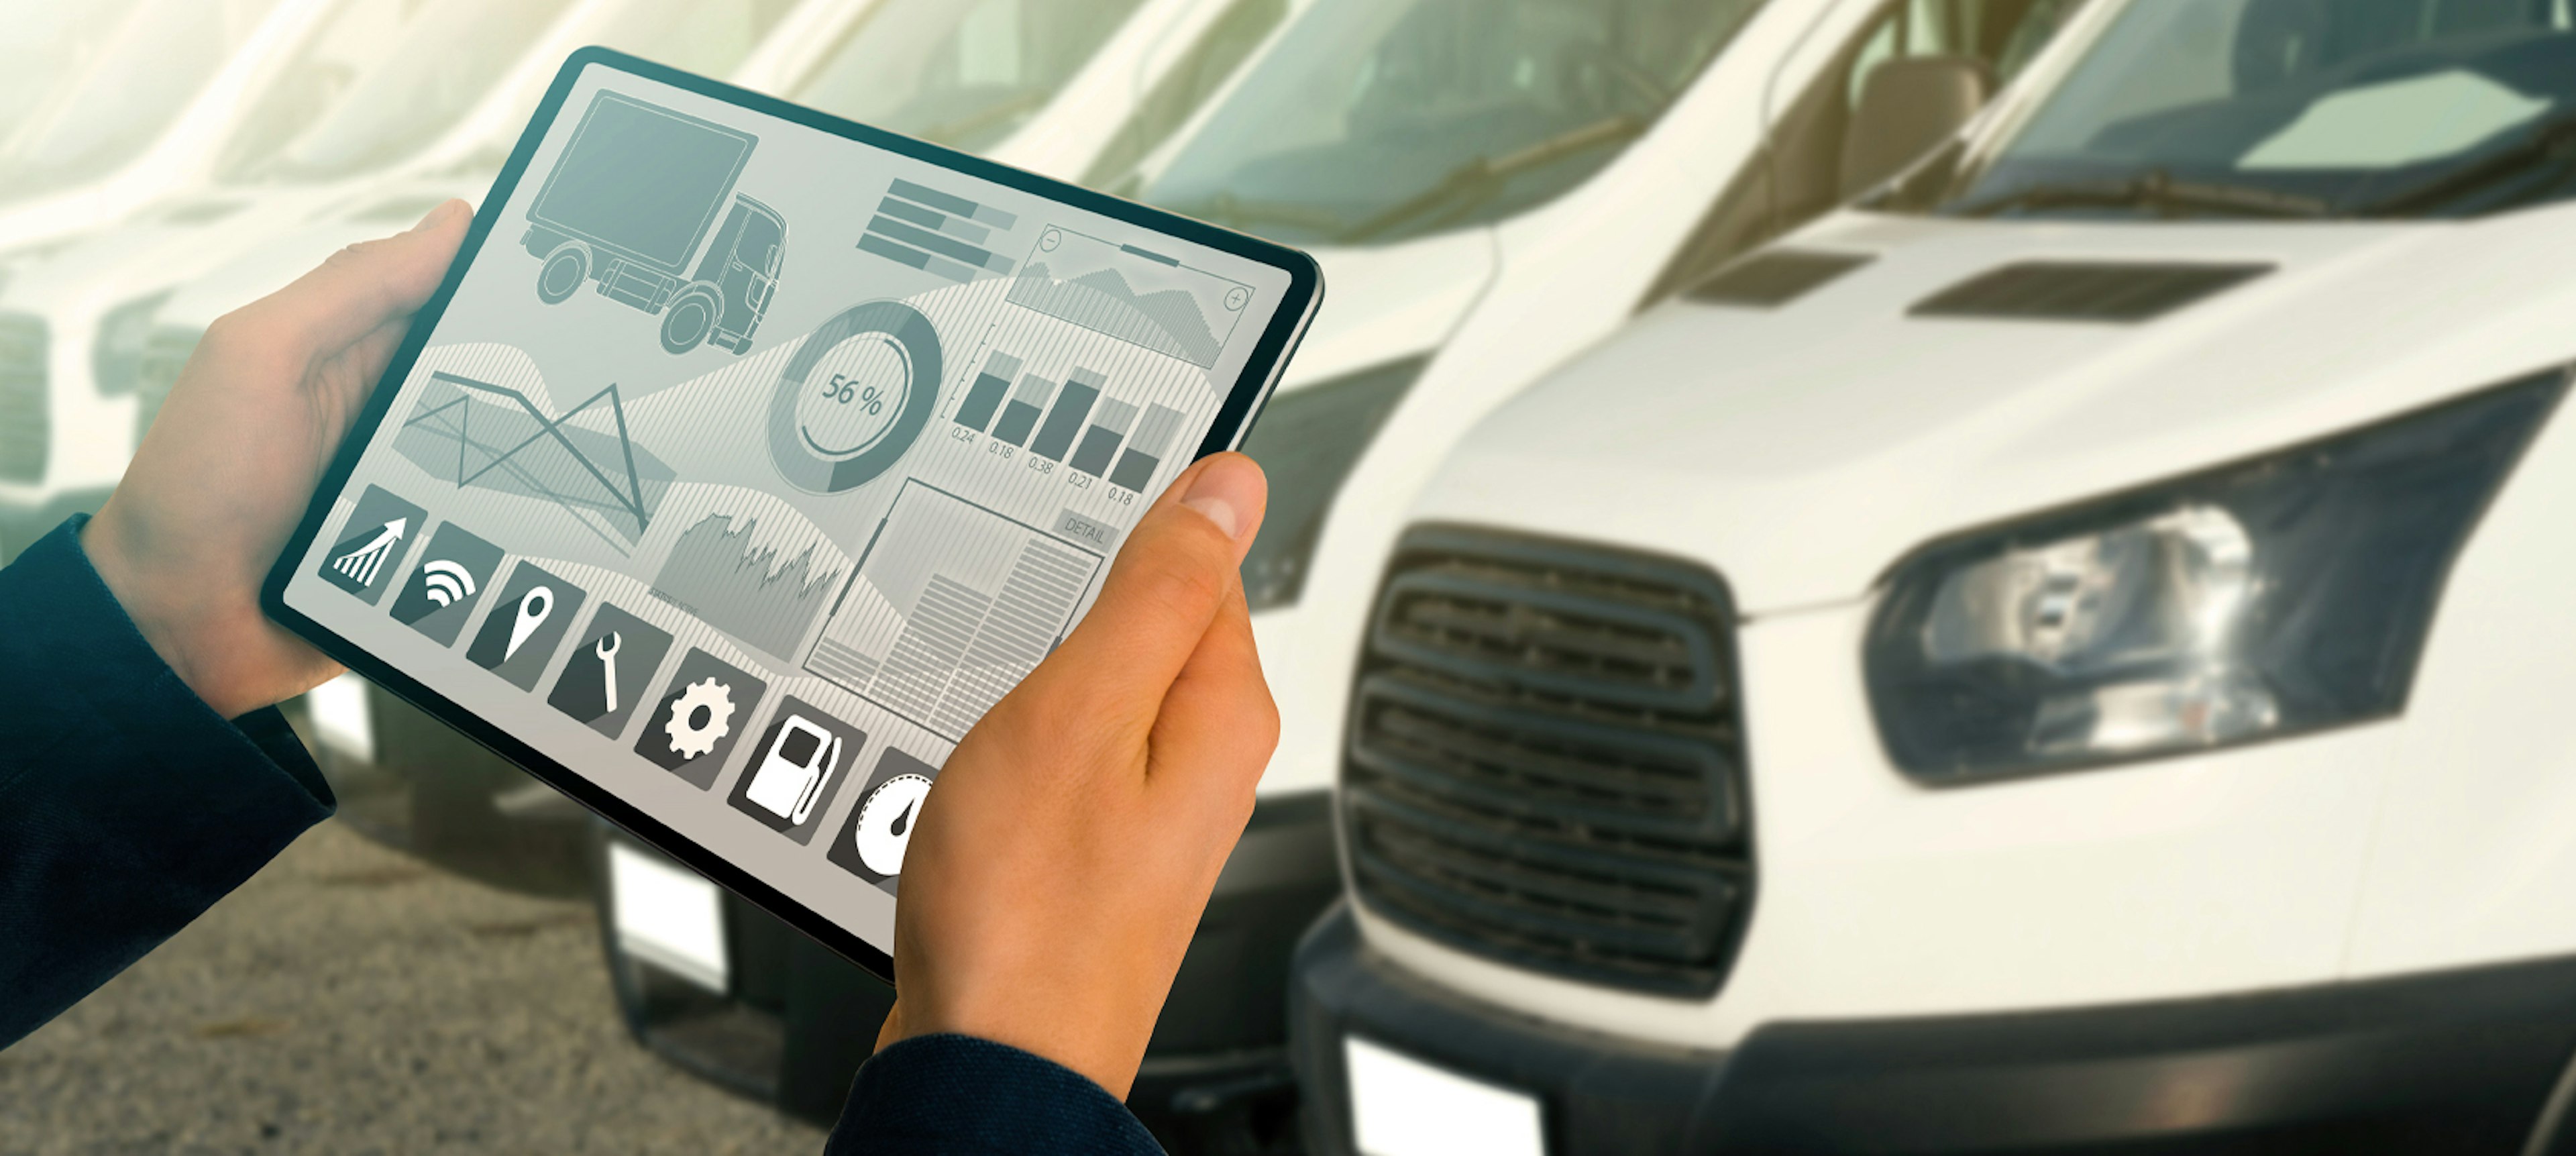 Person standing in front of fleet vehicles monitoring vehicle health on tablet